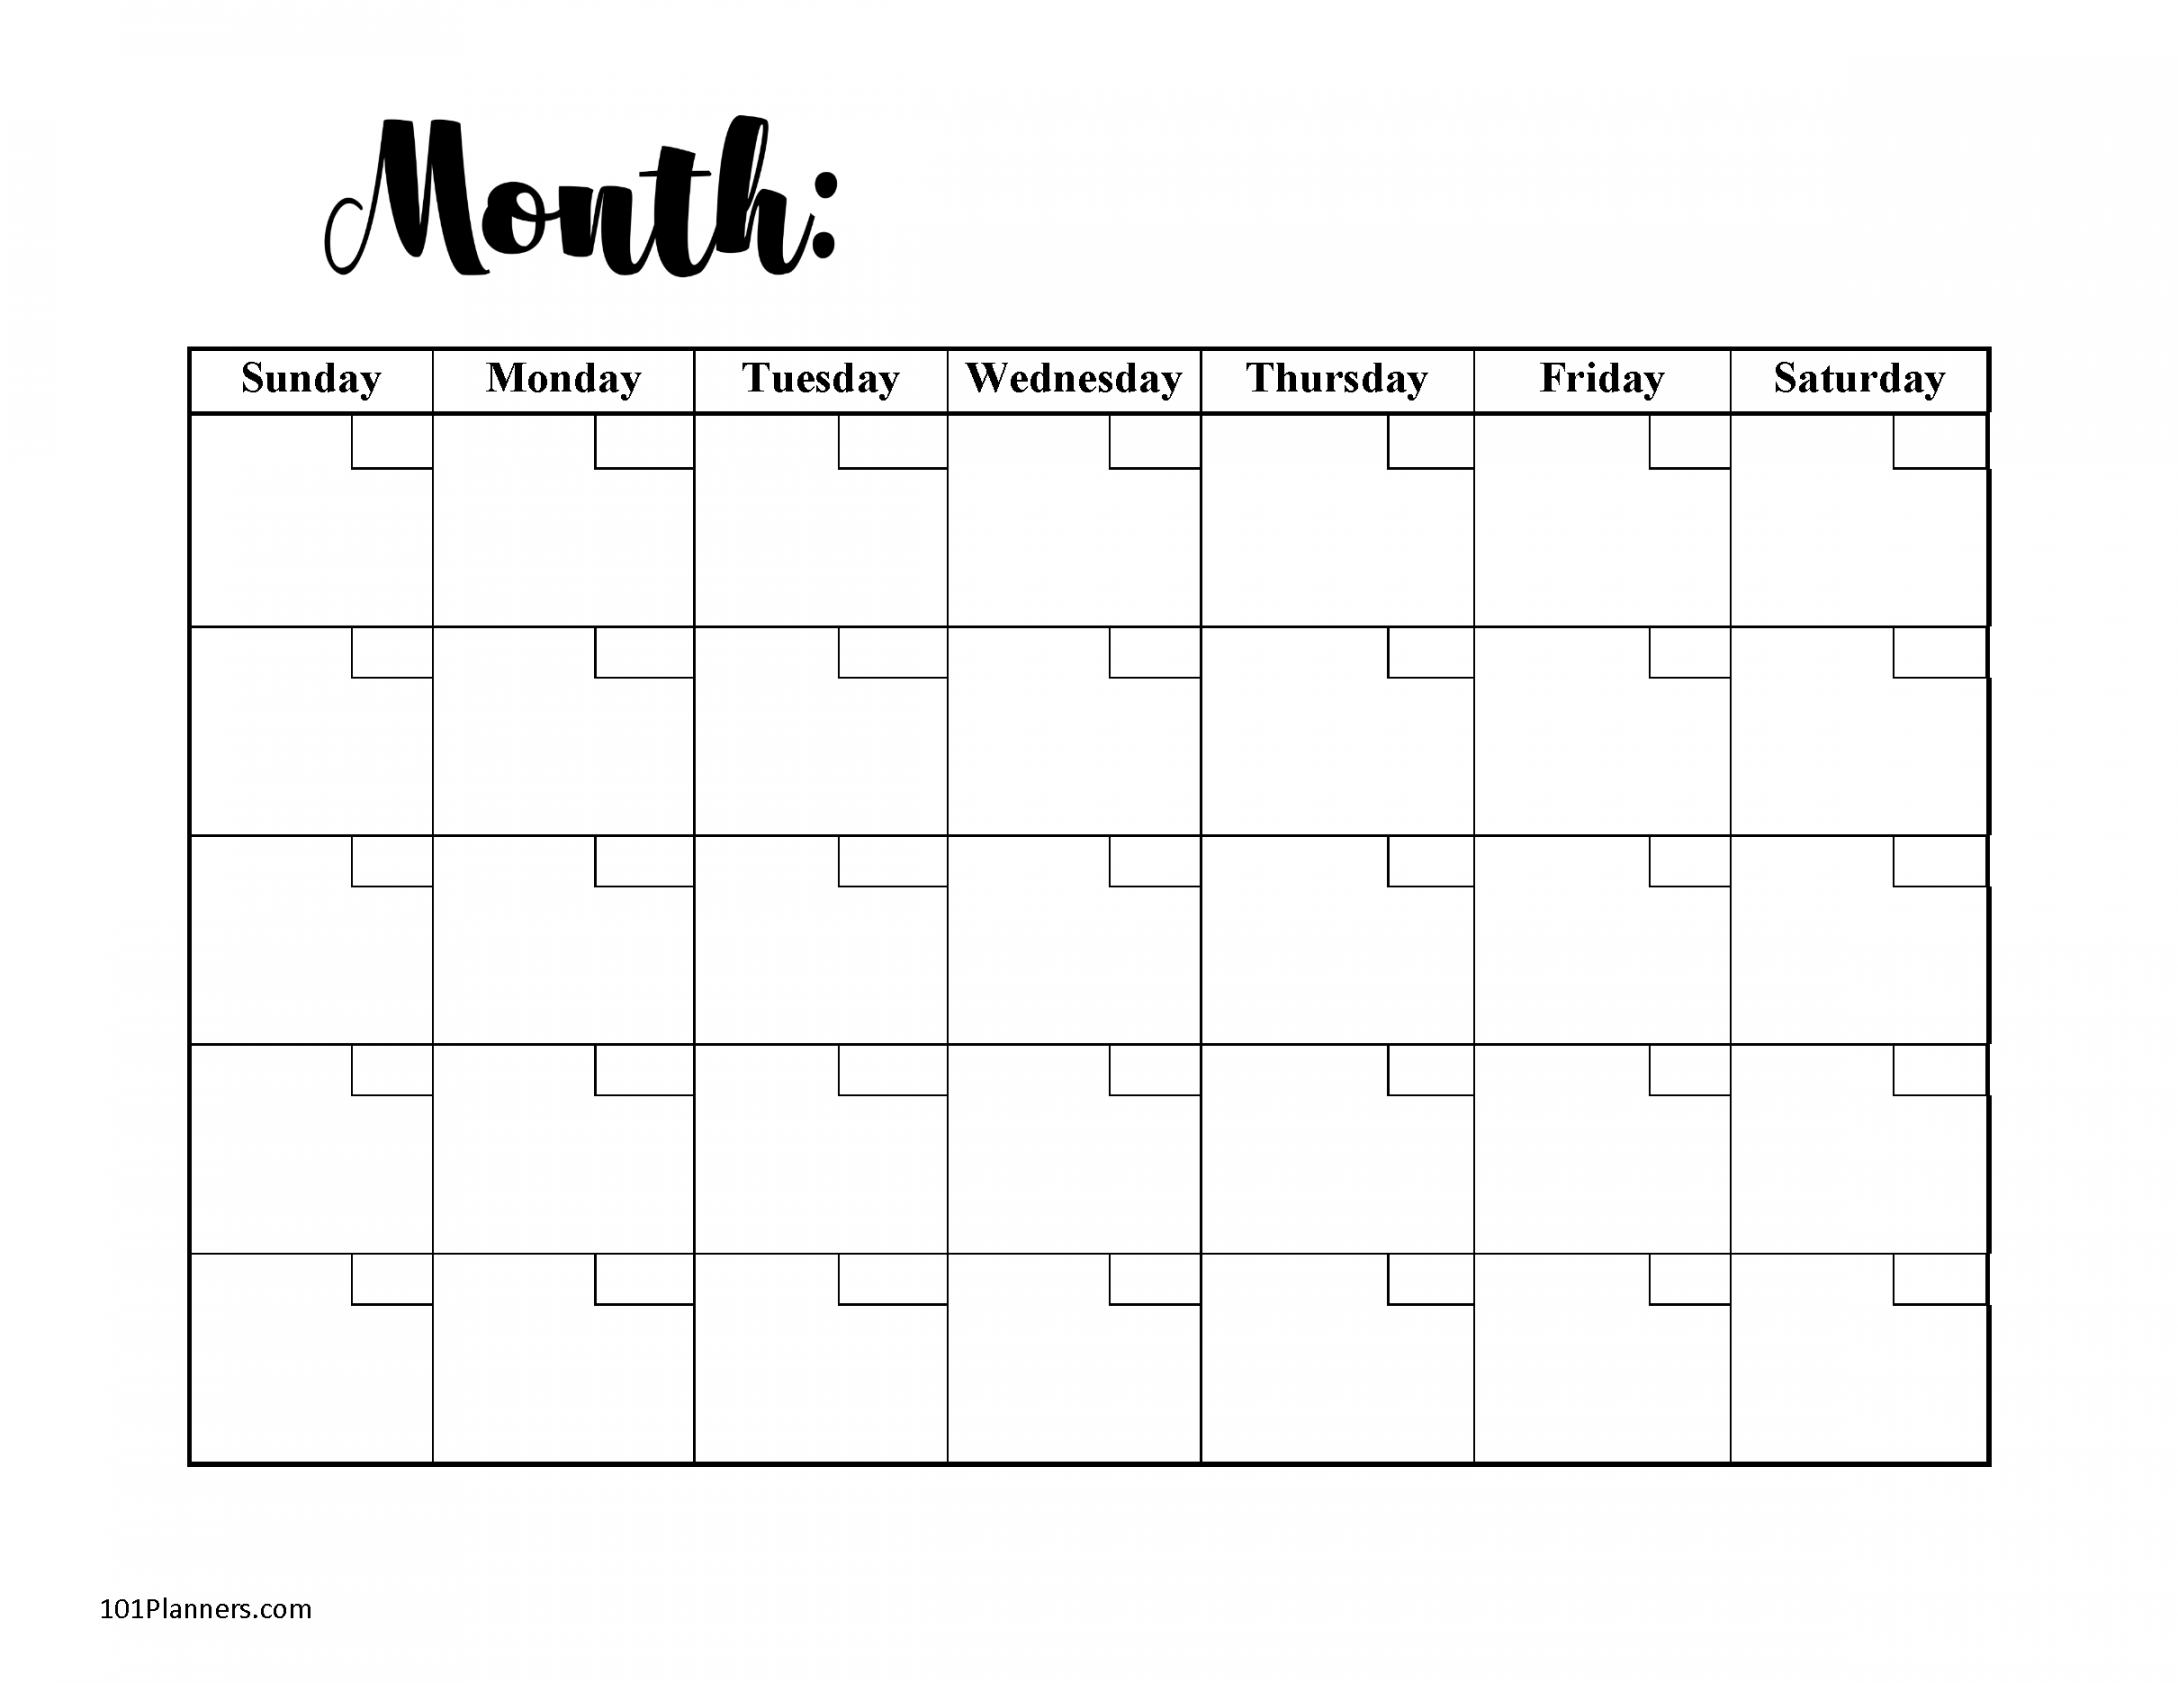 FREE Blank Calendar Templates  Word, Excel, PDF for any month